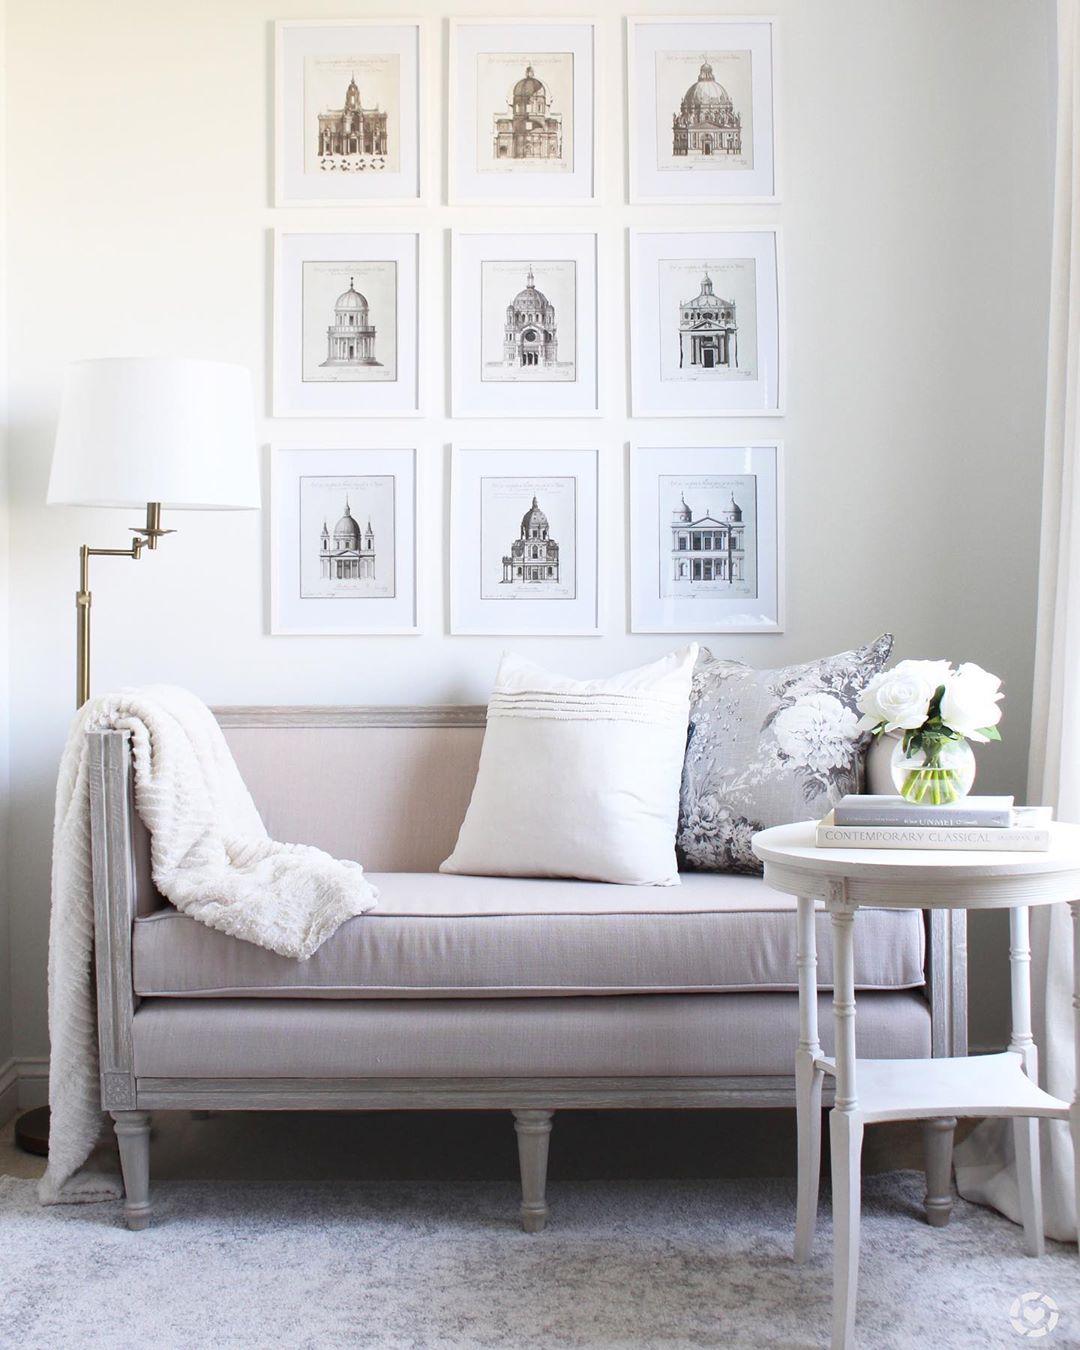 Clean Reading Space with a Gallery Wall Set Up and a Love Seat. Photo by Instagram user @tuftandtrim